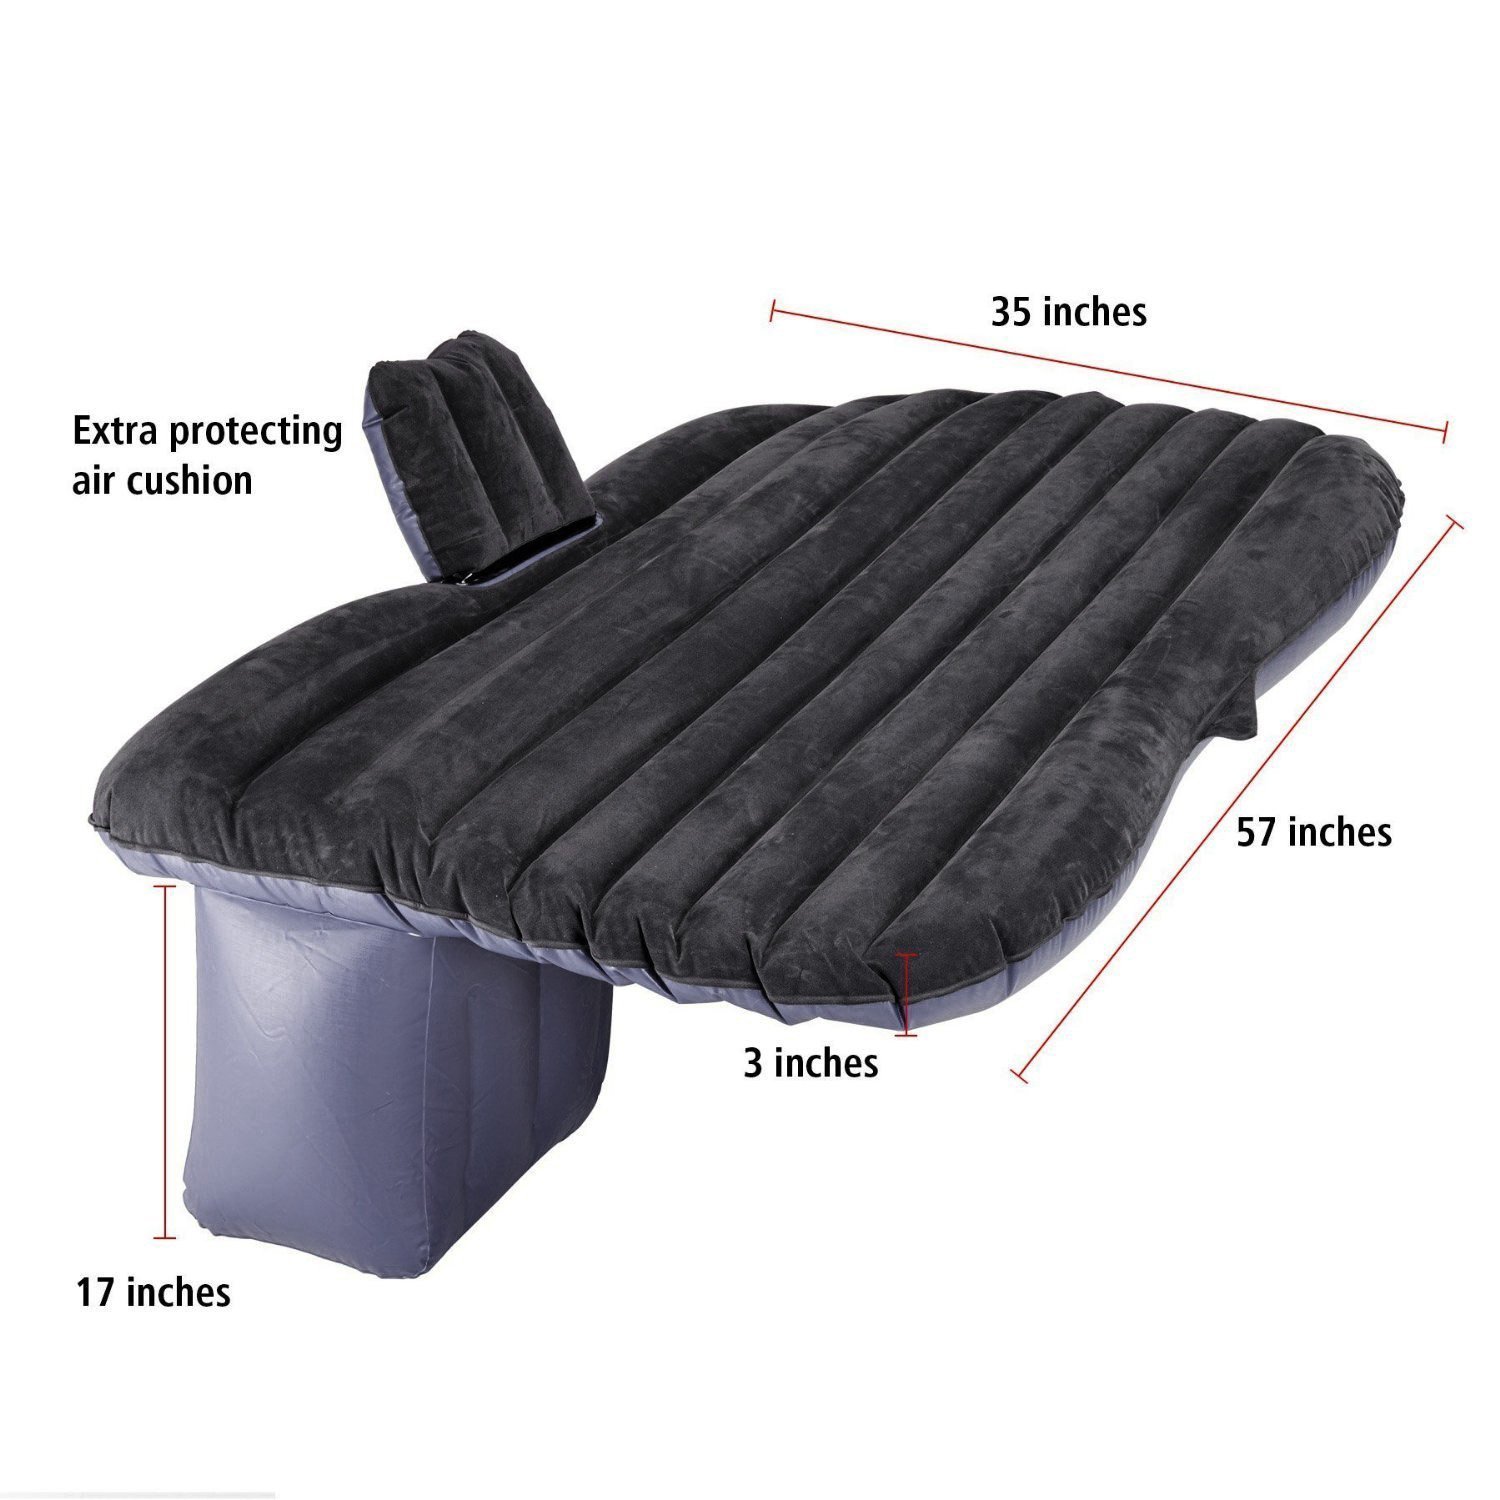 Deluxe Backseat Inflatable Mattress with sizes